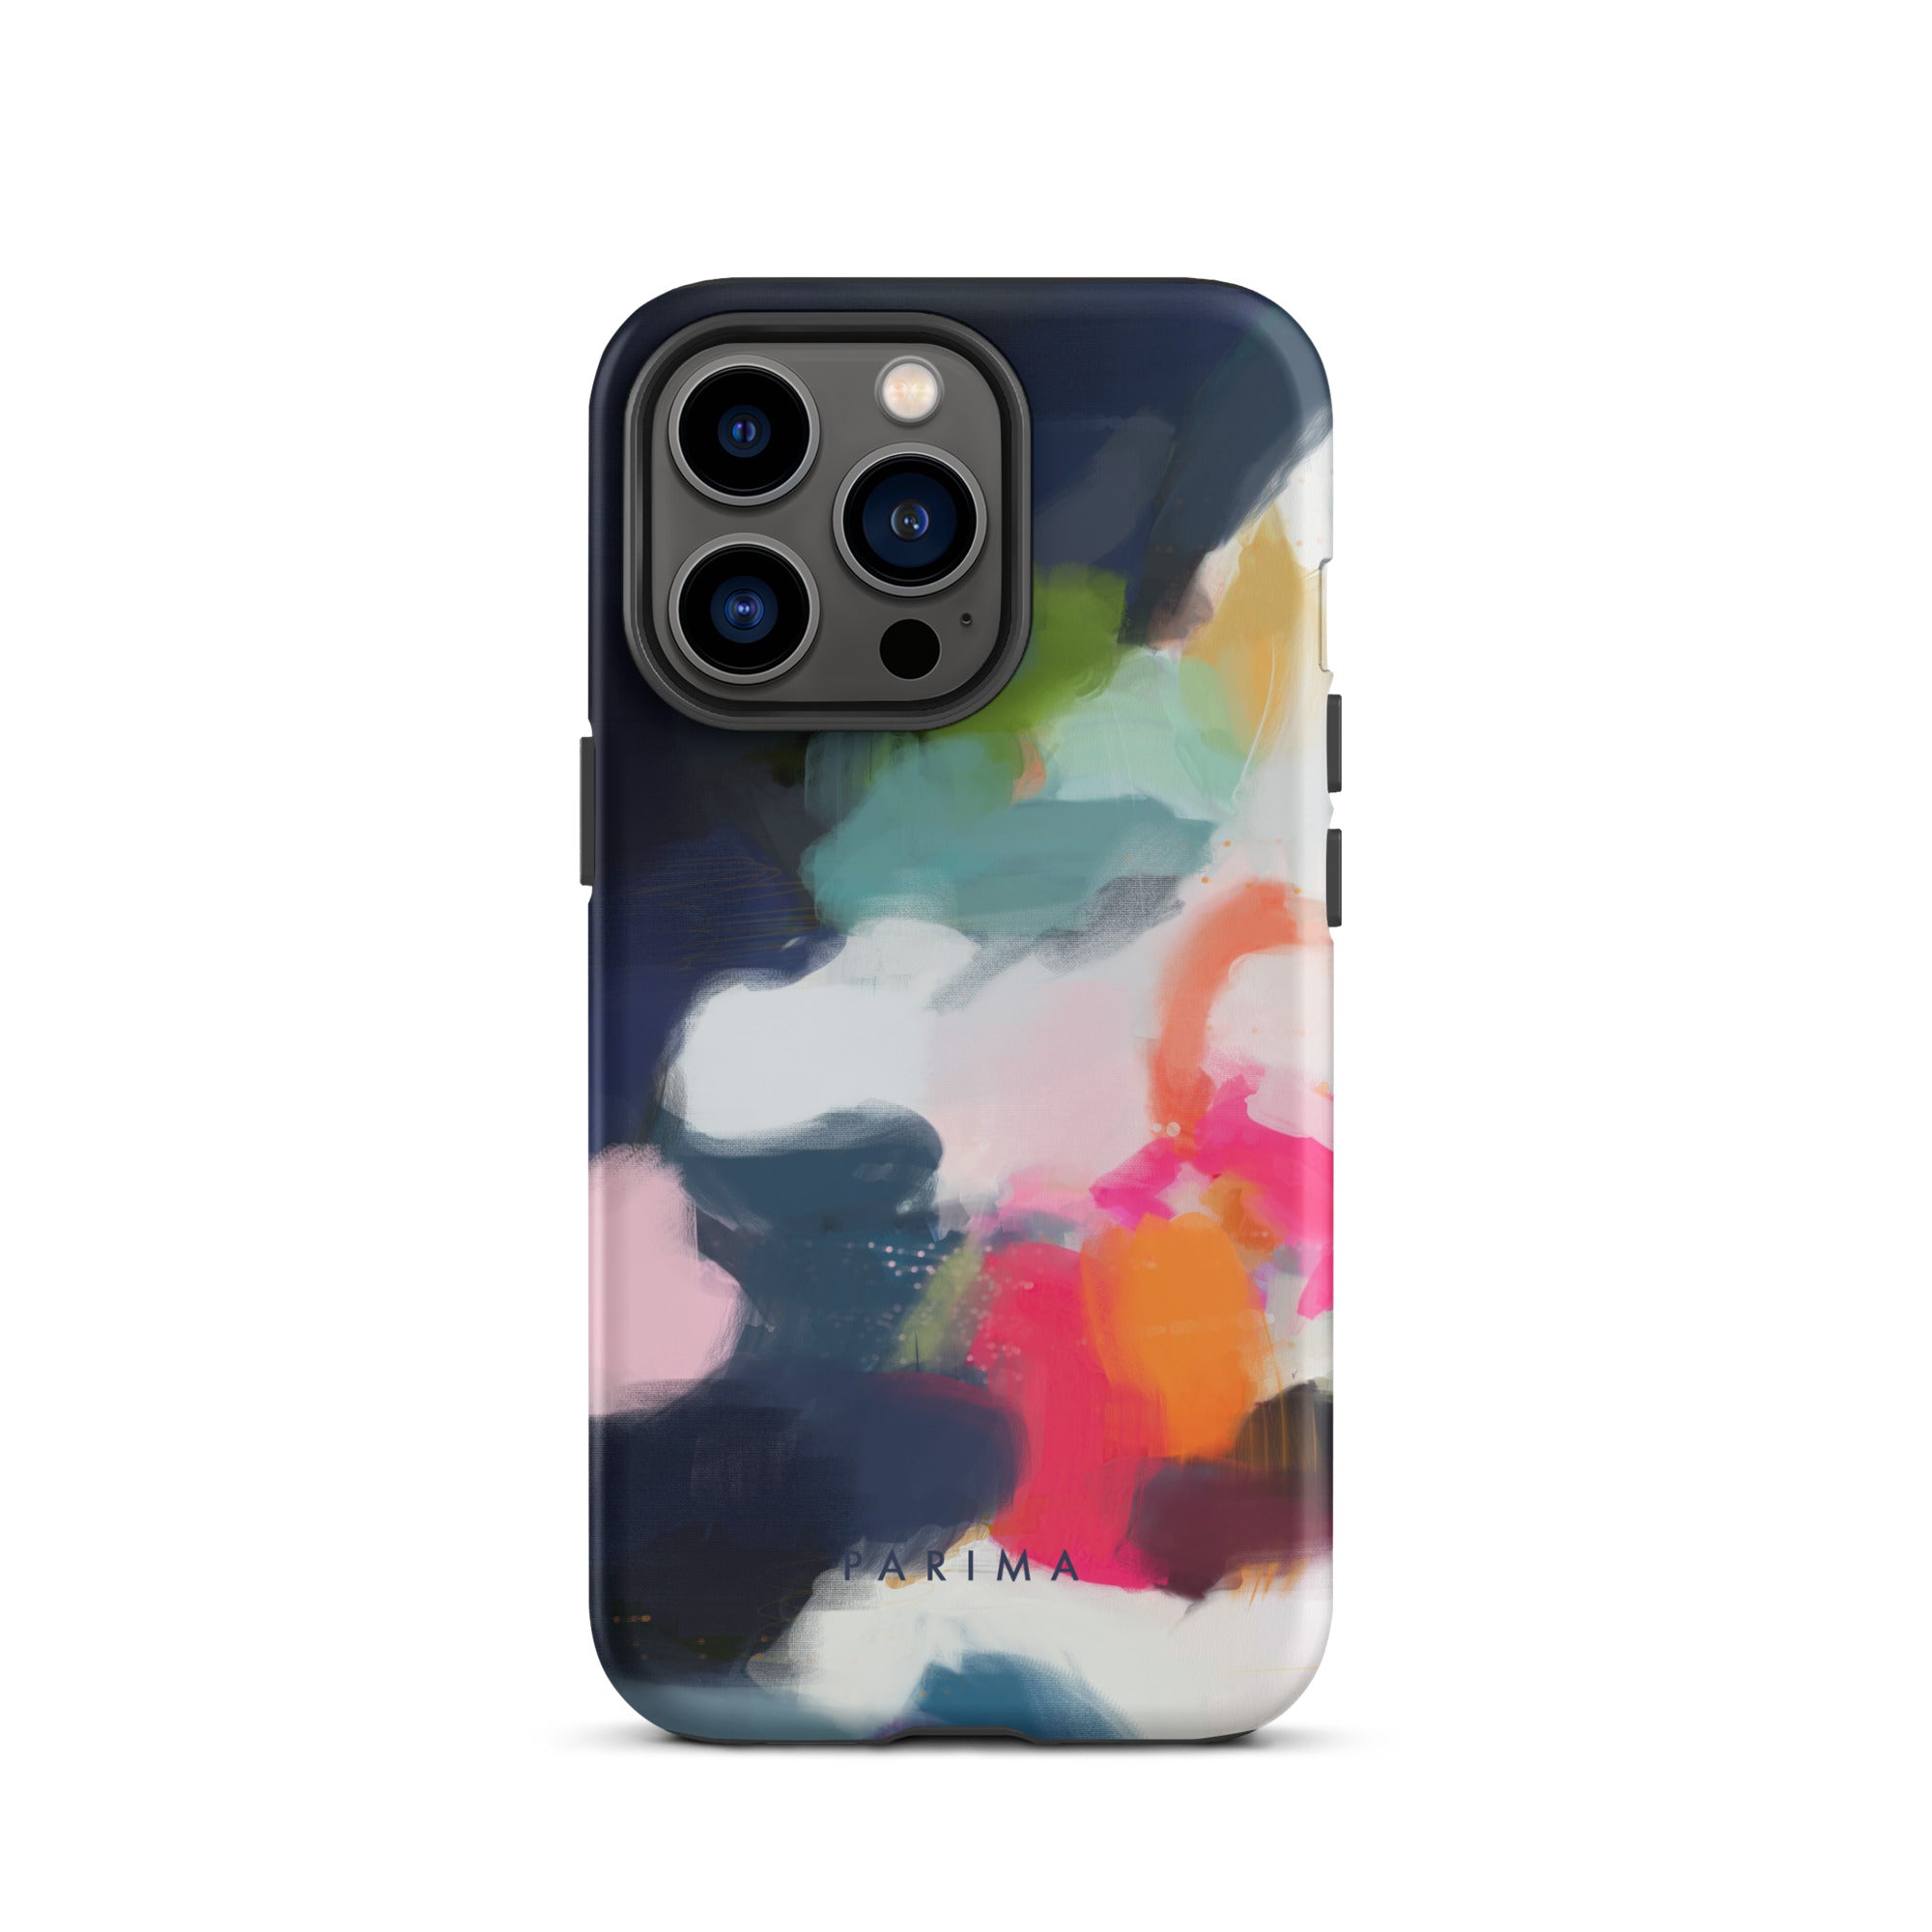 Eliza, pink and blue abstract art - iPhone 13 Pro tough case by Parima Studio